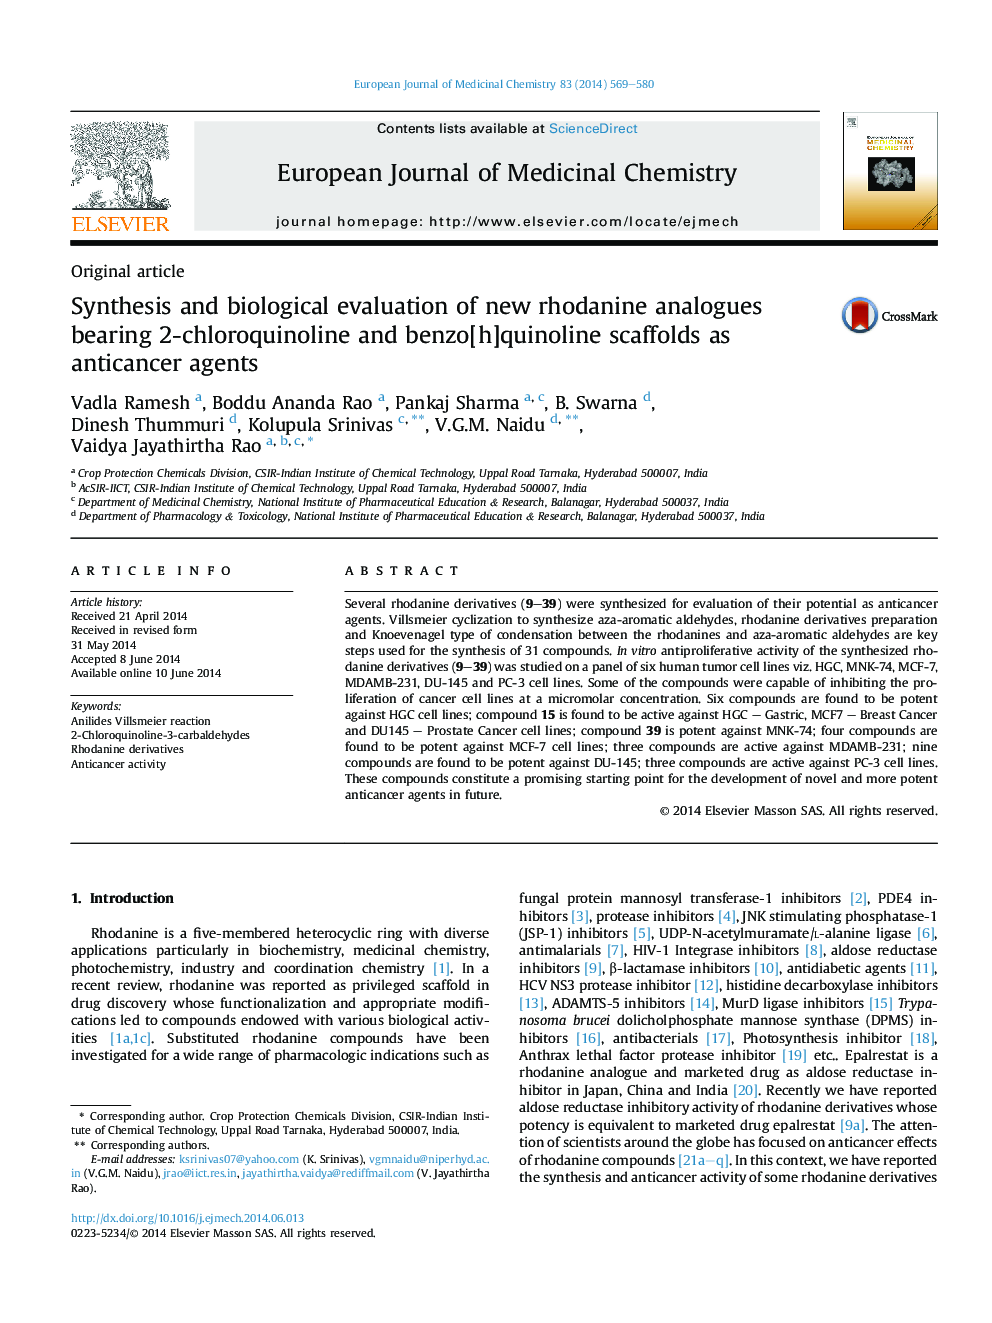 Synthesis and biological evaluation of new rhodanine analogues bearing 2-chloroquinoline and benzo[h]quinoline scaffolds as anticancer agents